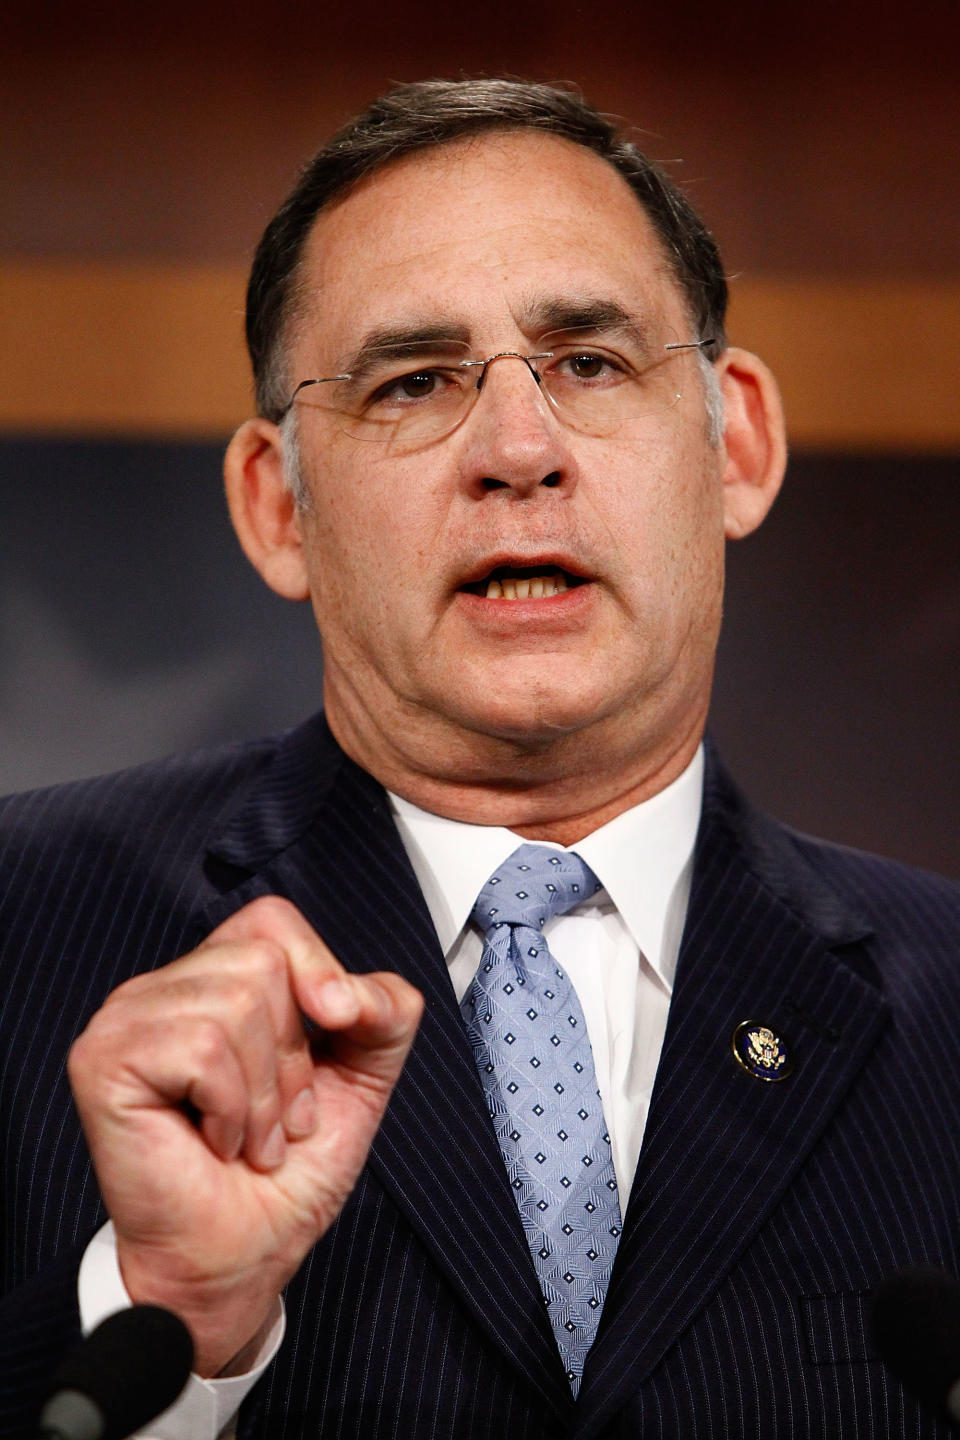 Then-GOP Doctors Caucus member Rep. John Boozman (R-AK) speaks during a news conference at the U.S. Capitol March 18, 2010 in Washington, D.C.  (Photo by Chip Somodevilla/Getty Images)